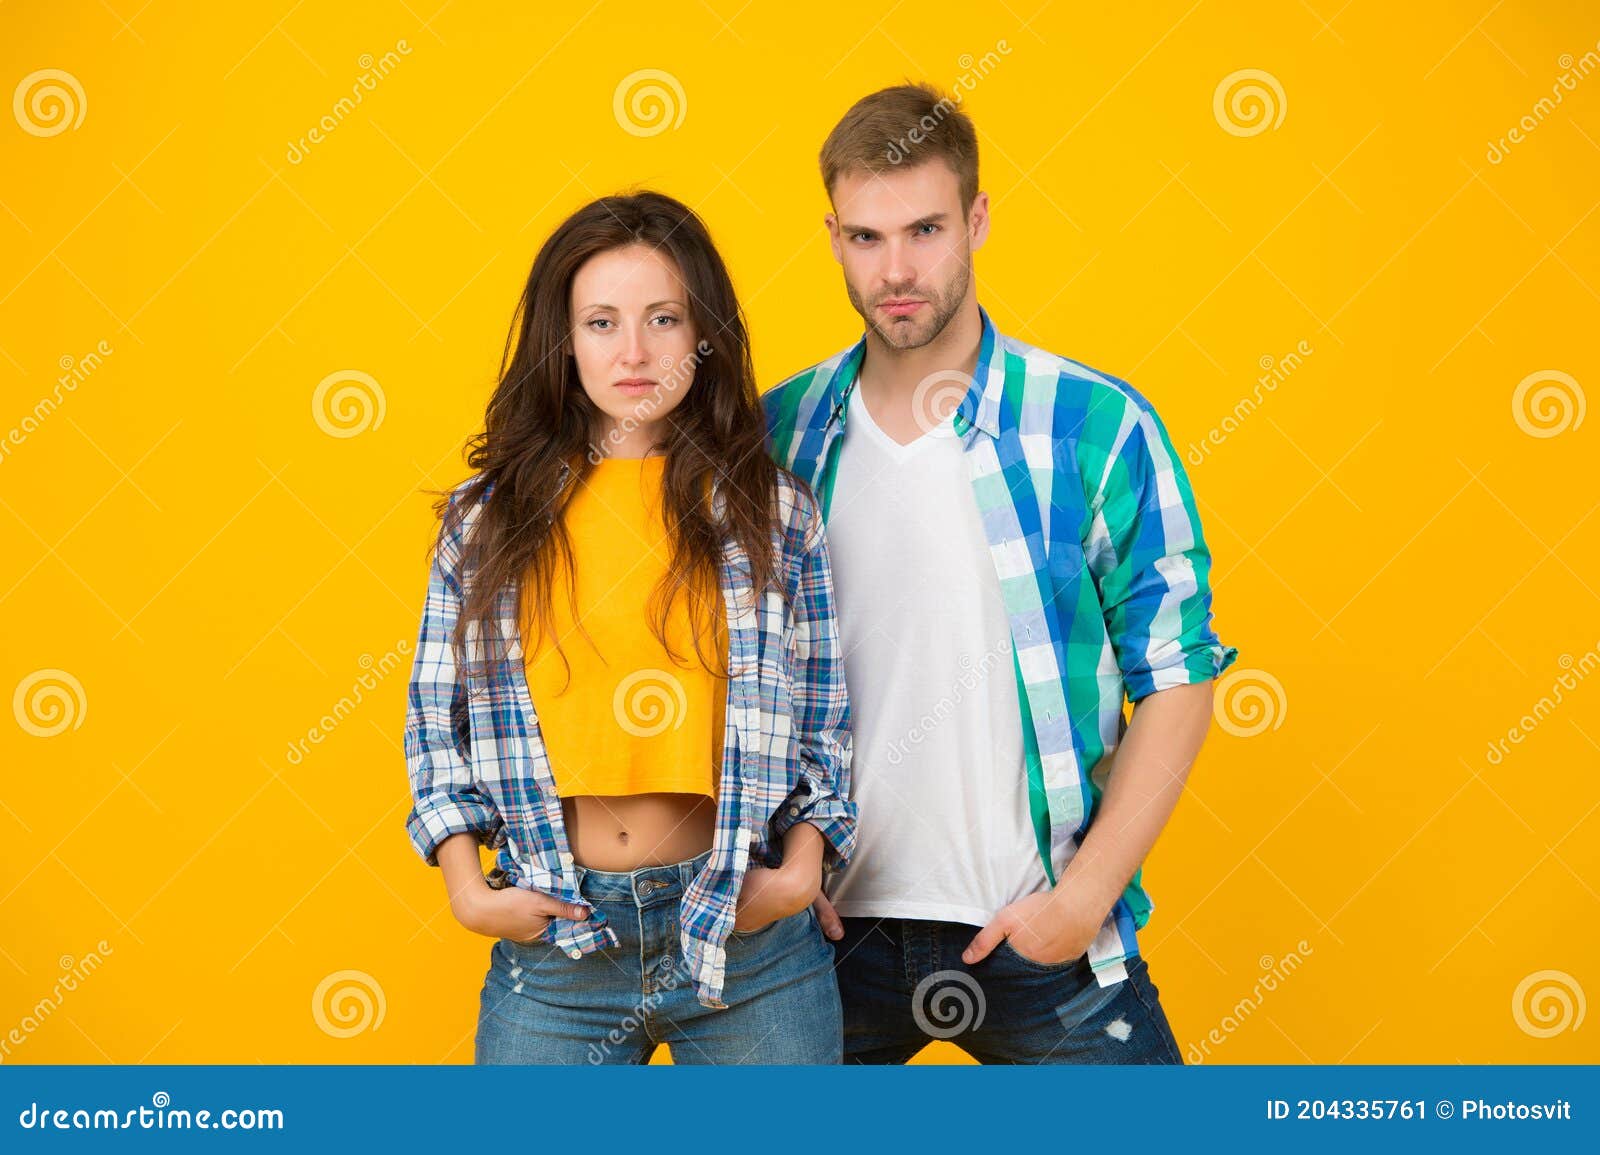 https://thumbs.dreamstime.com/z/their-style-lot-more-casual-couple-casual-wear-vogue-models-yellow-background-fashion-clothes-contemporary-streetwear-204335761.jpg